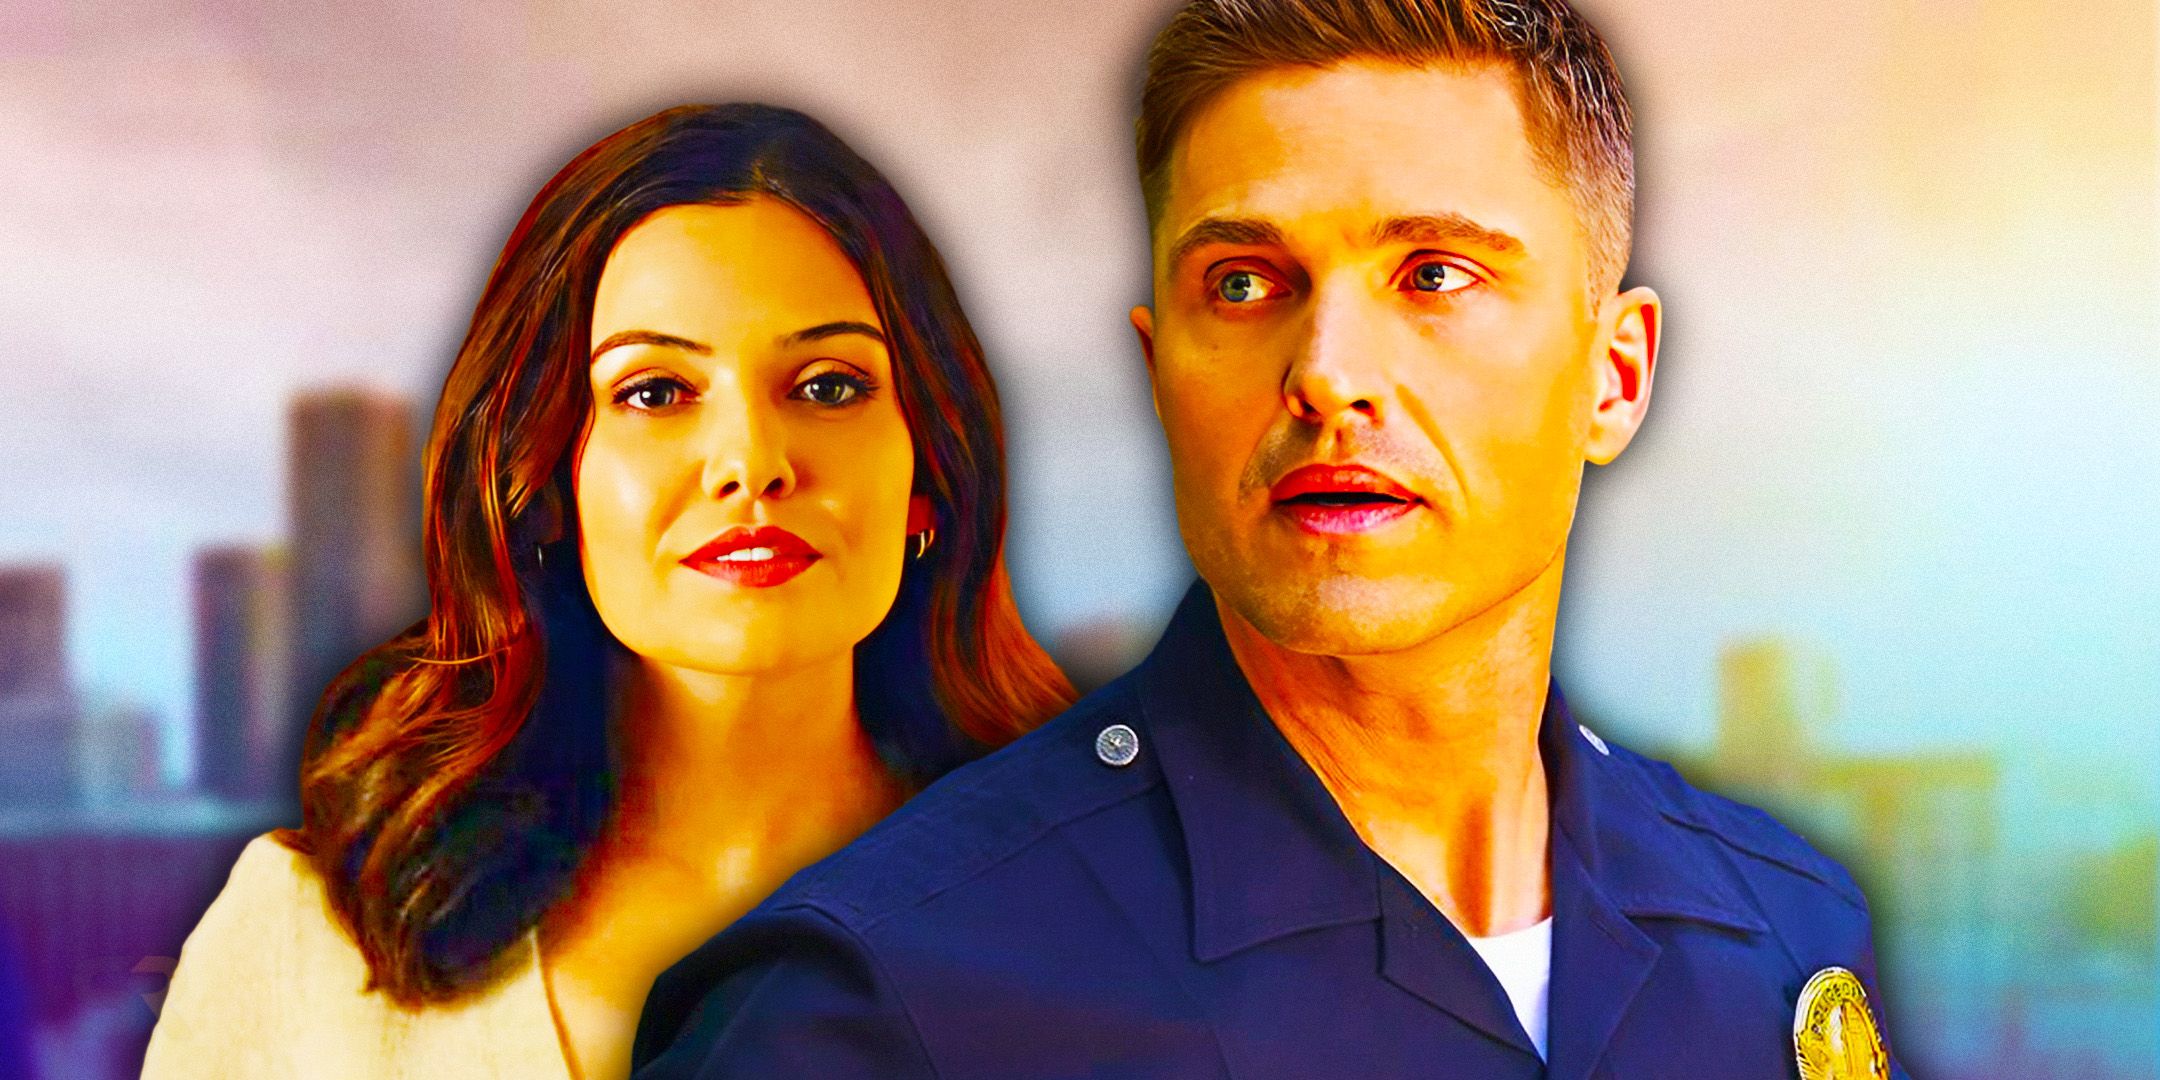 Eric Winter as Tim Bradford and Danielle Campbell as Blair London in The Rookie.